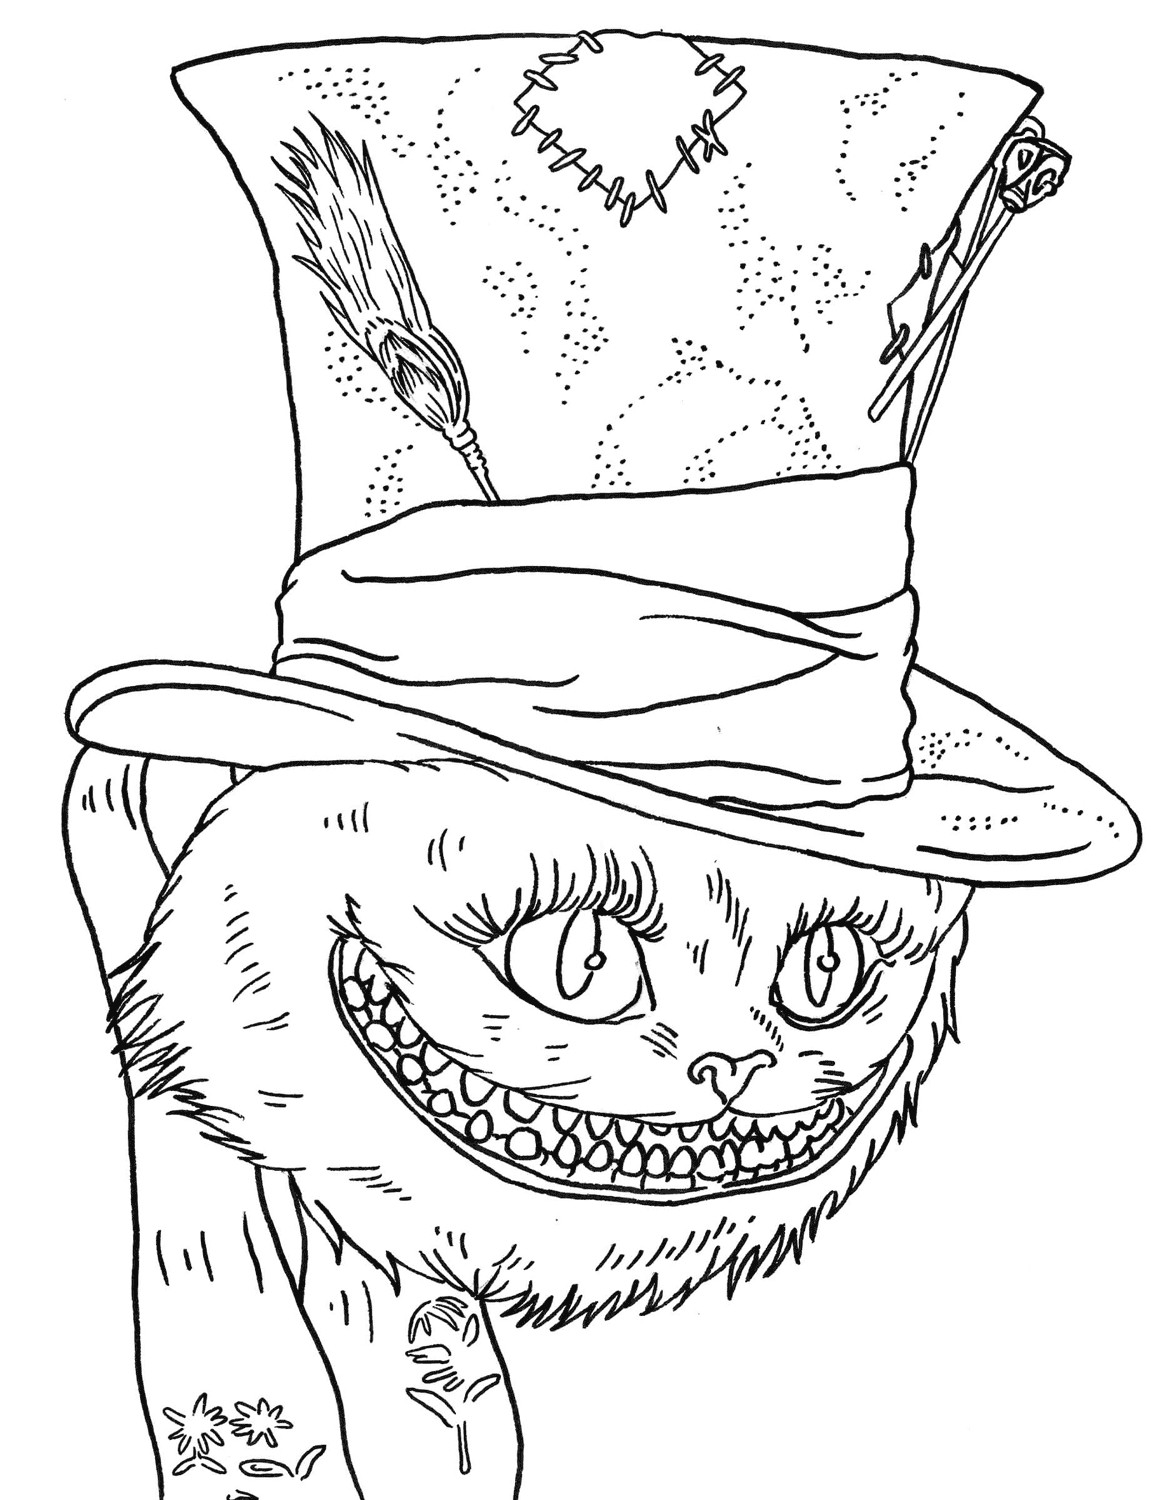 Cheshire Cat Coloring Pages
 Cheshire Cat Coloring Pages to and print for free